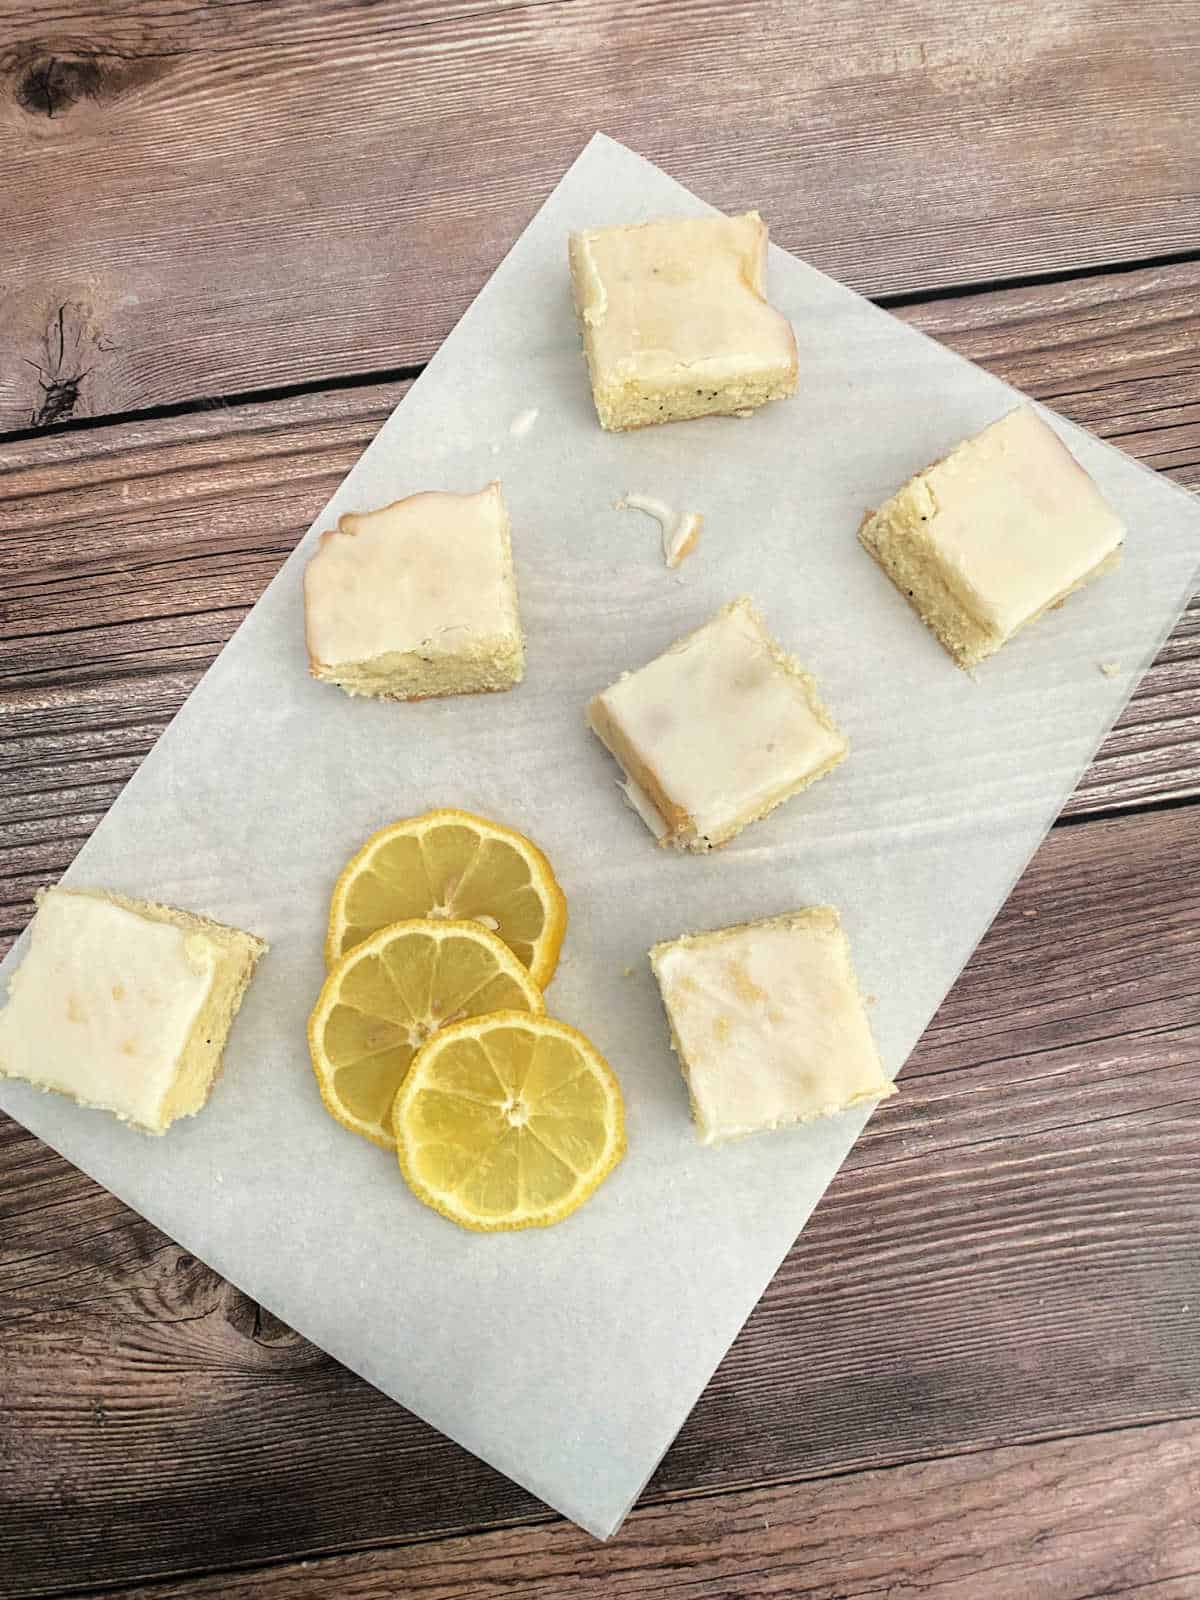 Overhead images of sliced bars and lemon slices on a piece of parchment paper on a wooden background. 